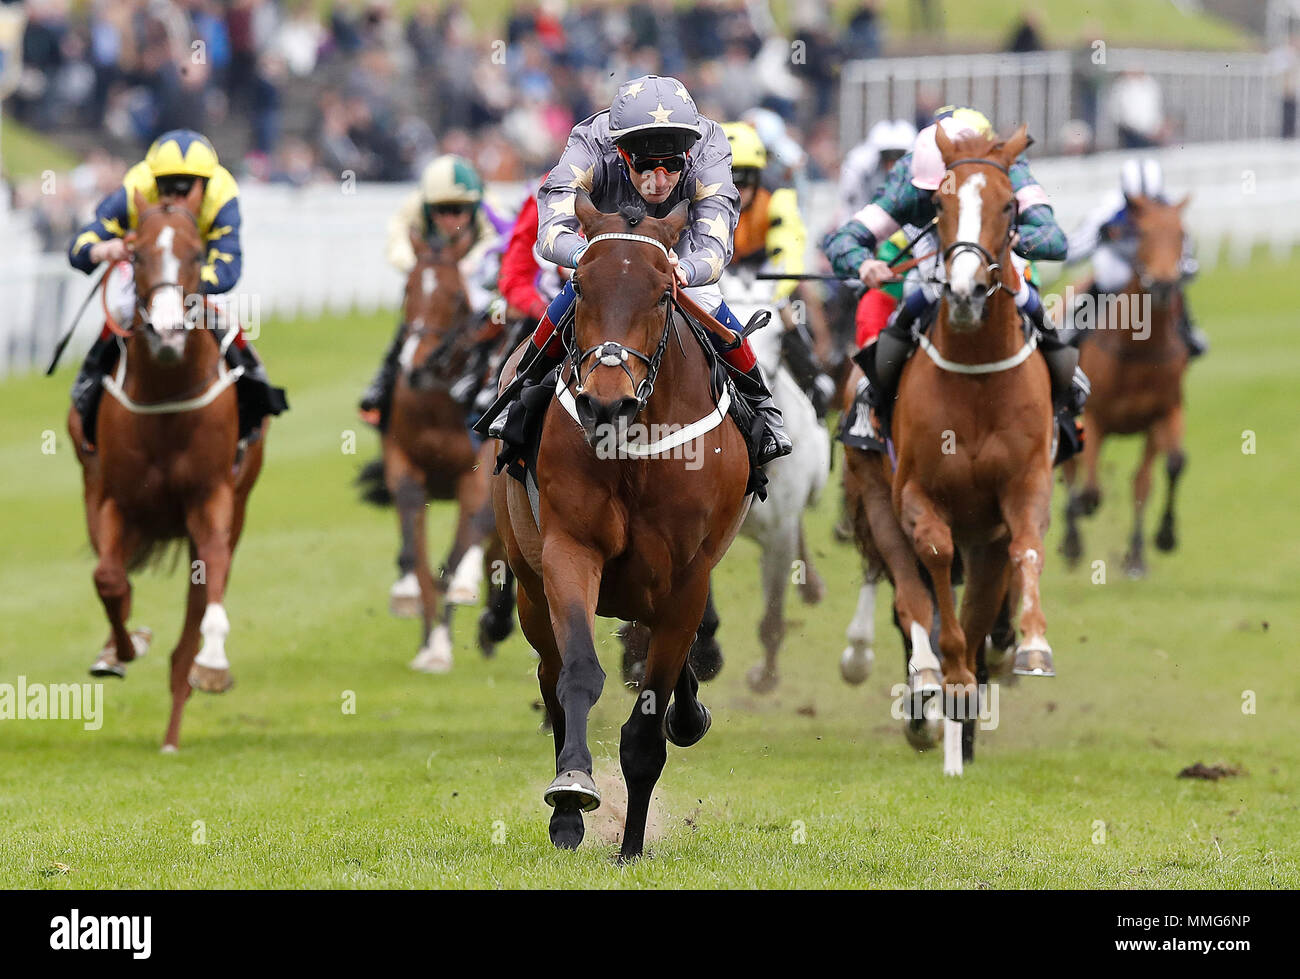 Magic Circle (centre) ridden by Fran Berry wins The 188bet Chester Cup Handicap Stakes, during 188BET Chester Cup Day of the 2018 Boodles May Festival at Chester Racecourse. PRESS ASSOCIATION Photo. Picture date: Friday May 11, 2018. See PA story Racing Chester. Photo credit should read: Martin Rickett/PA Wire Stock Photo